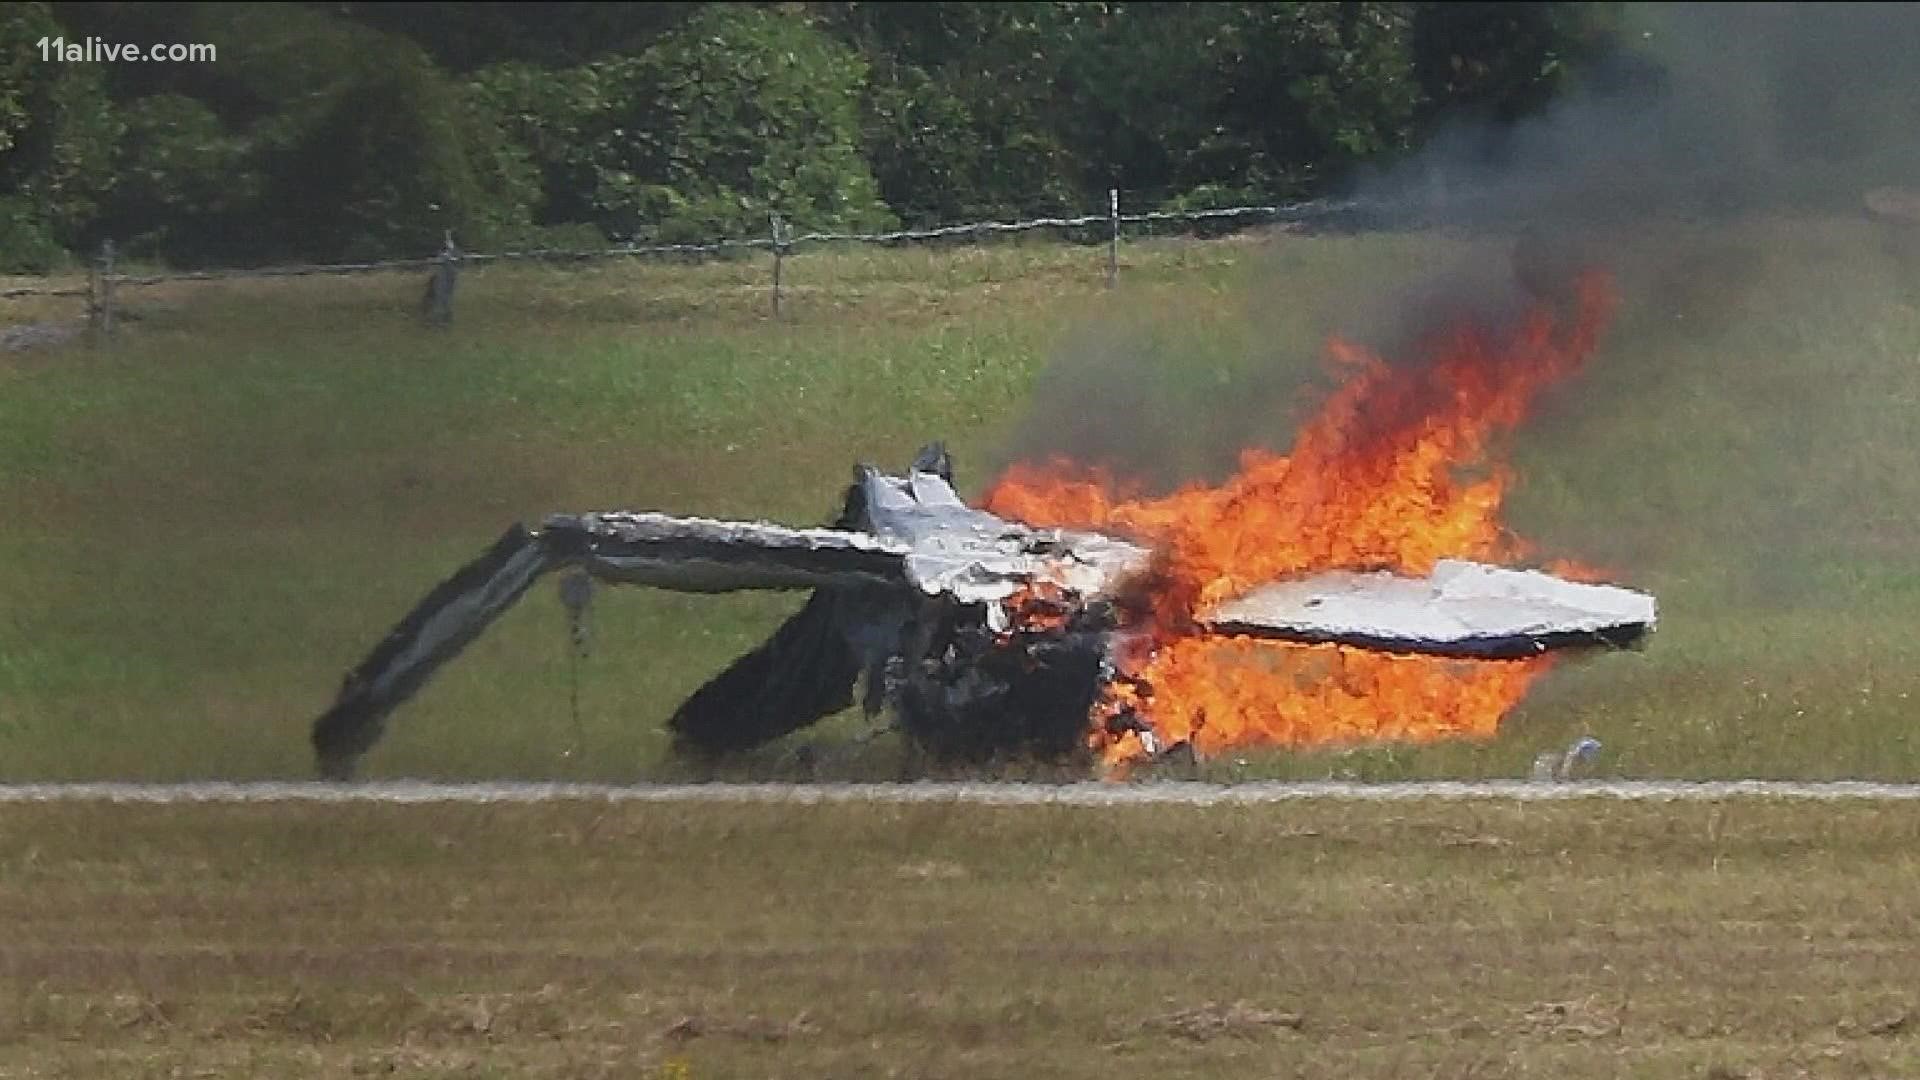 Officials are still trying to figure out what caused a single engine plane to go down on Friday.